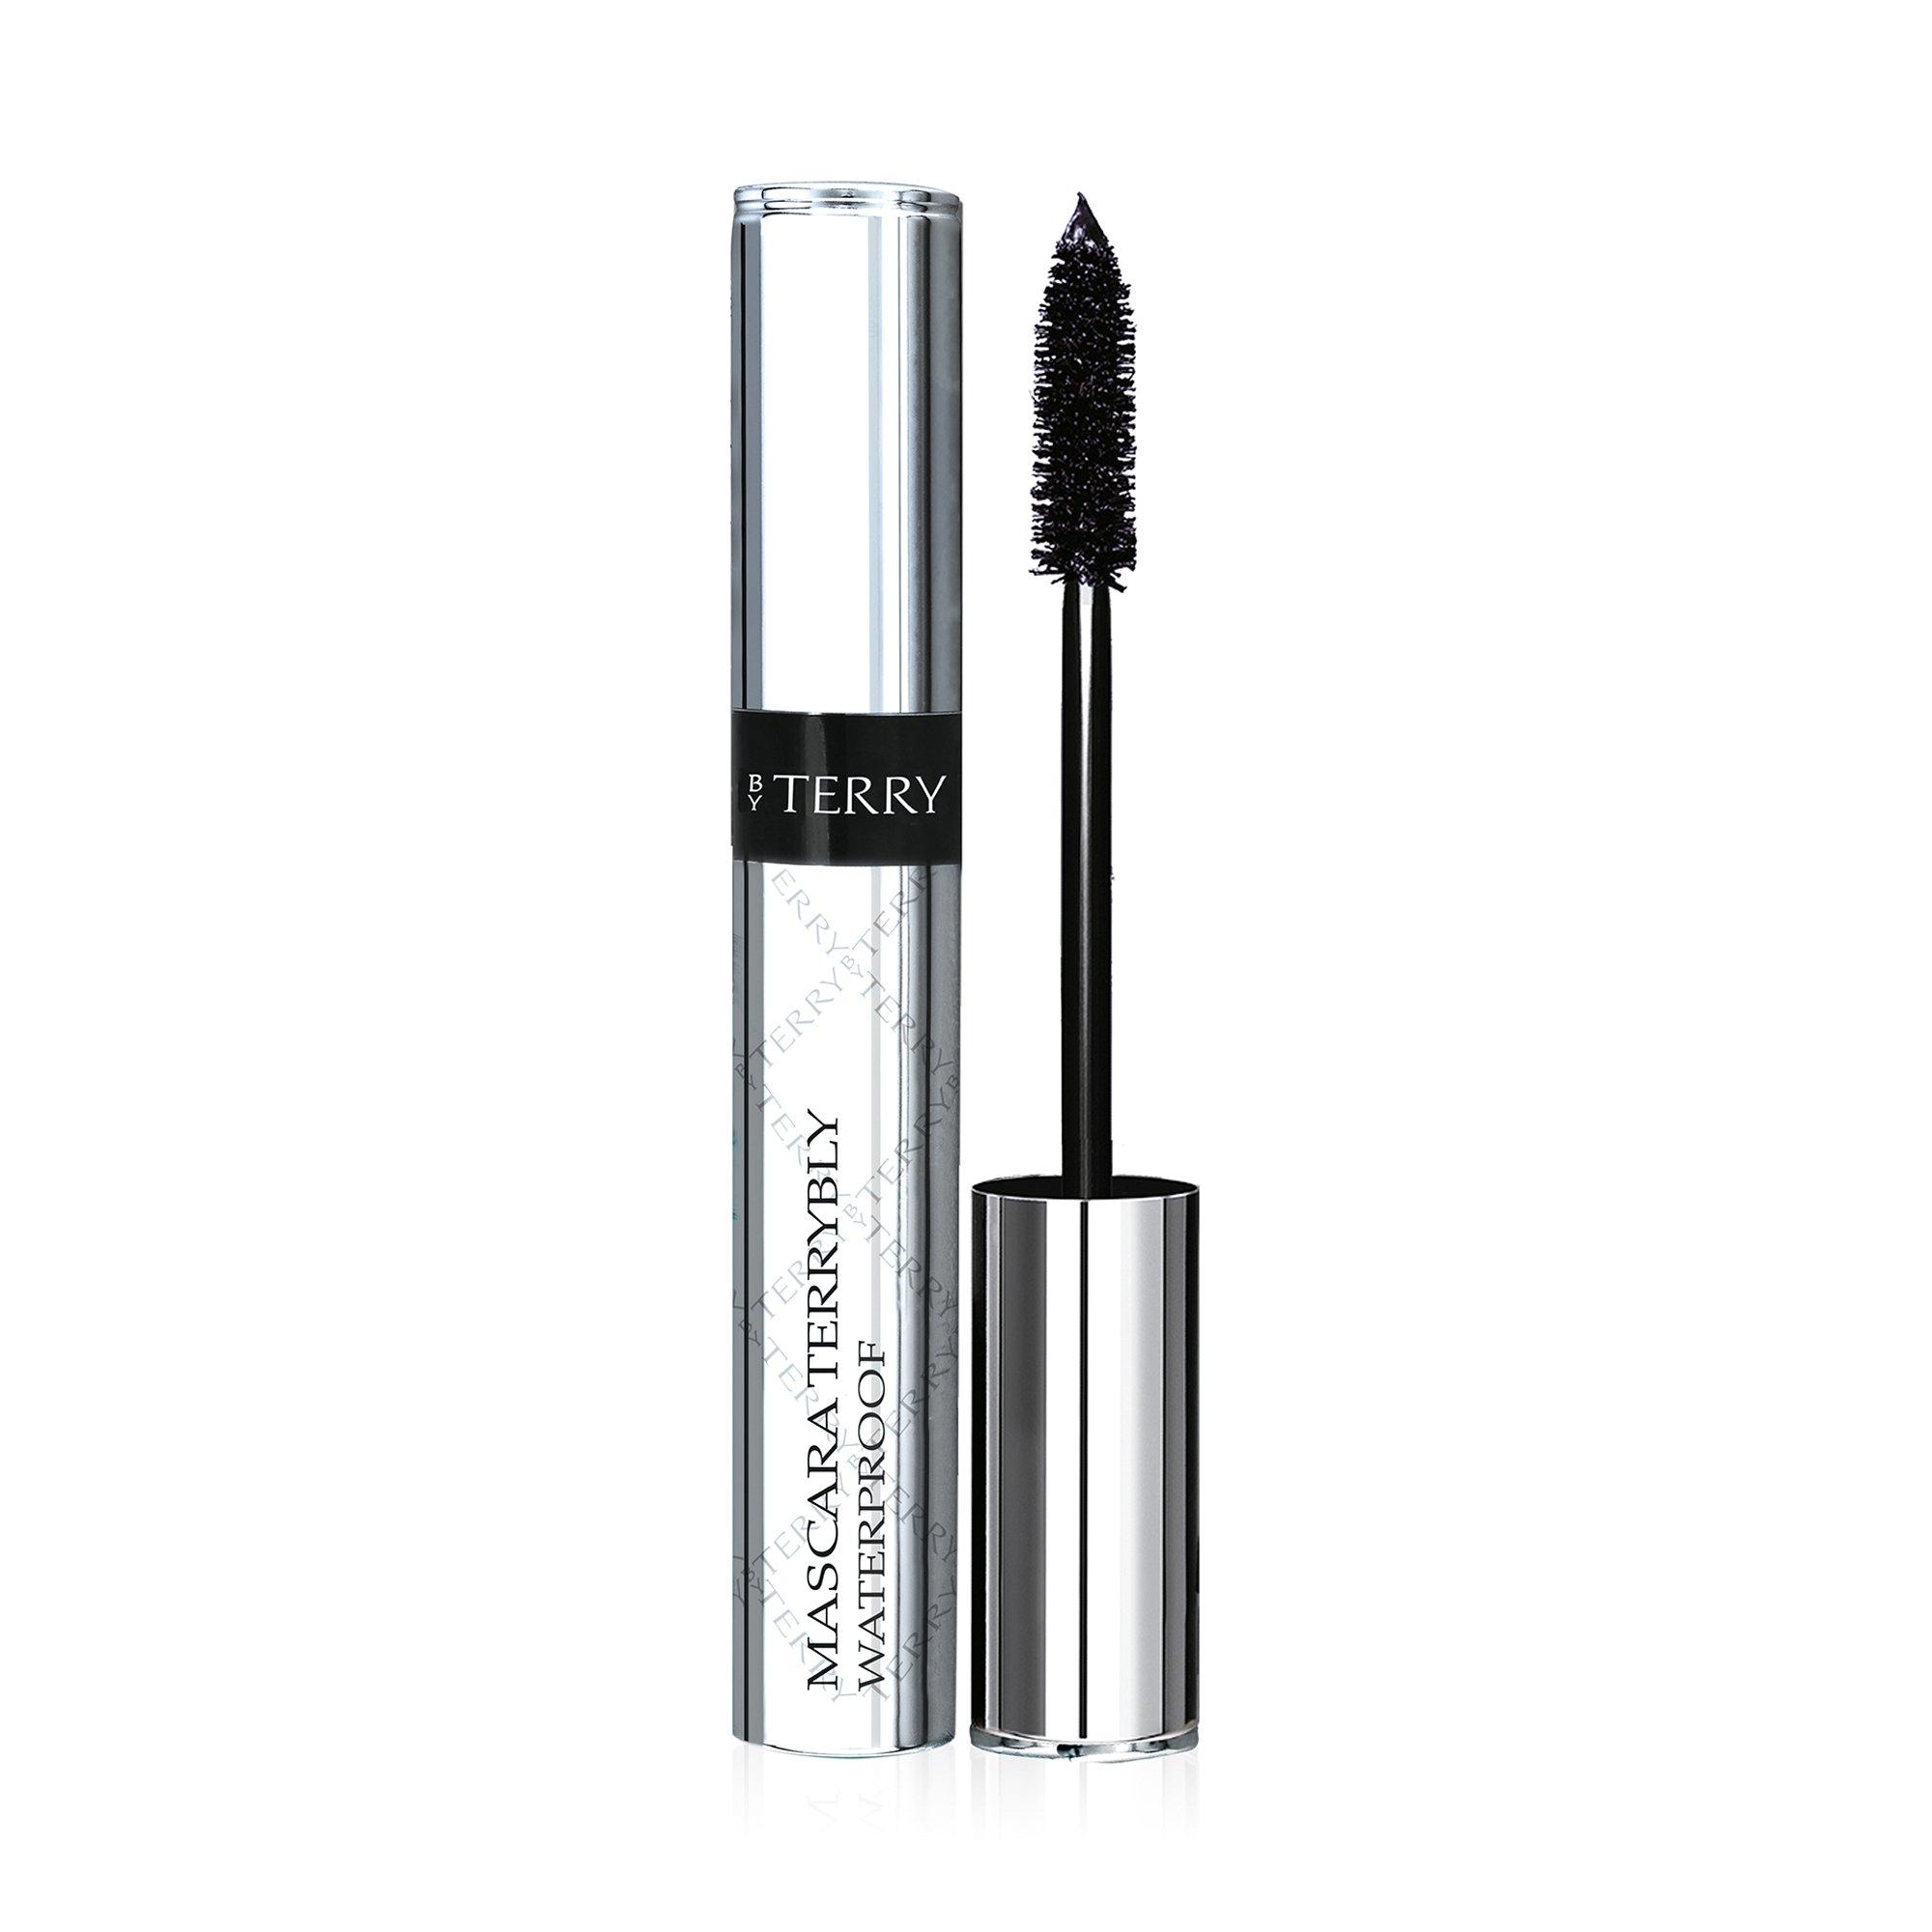 Image of BY TERRY Mascara Terrybly Waterproof - 8g